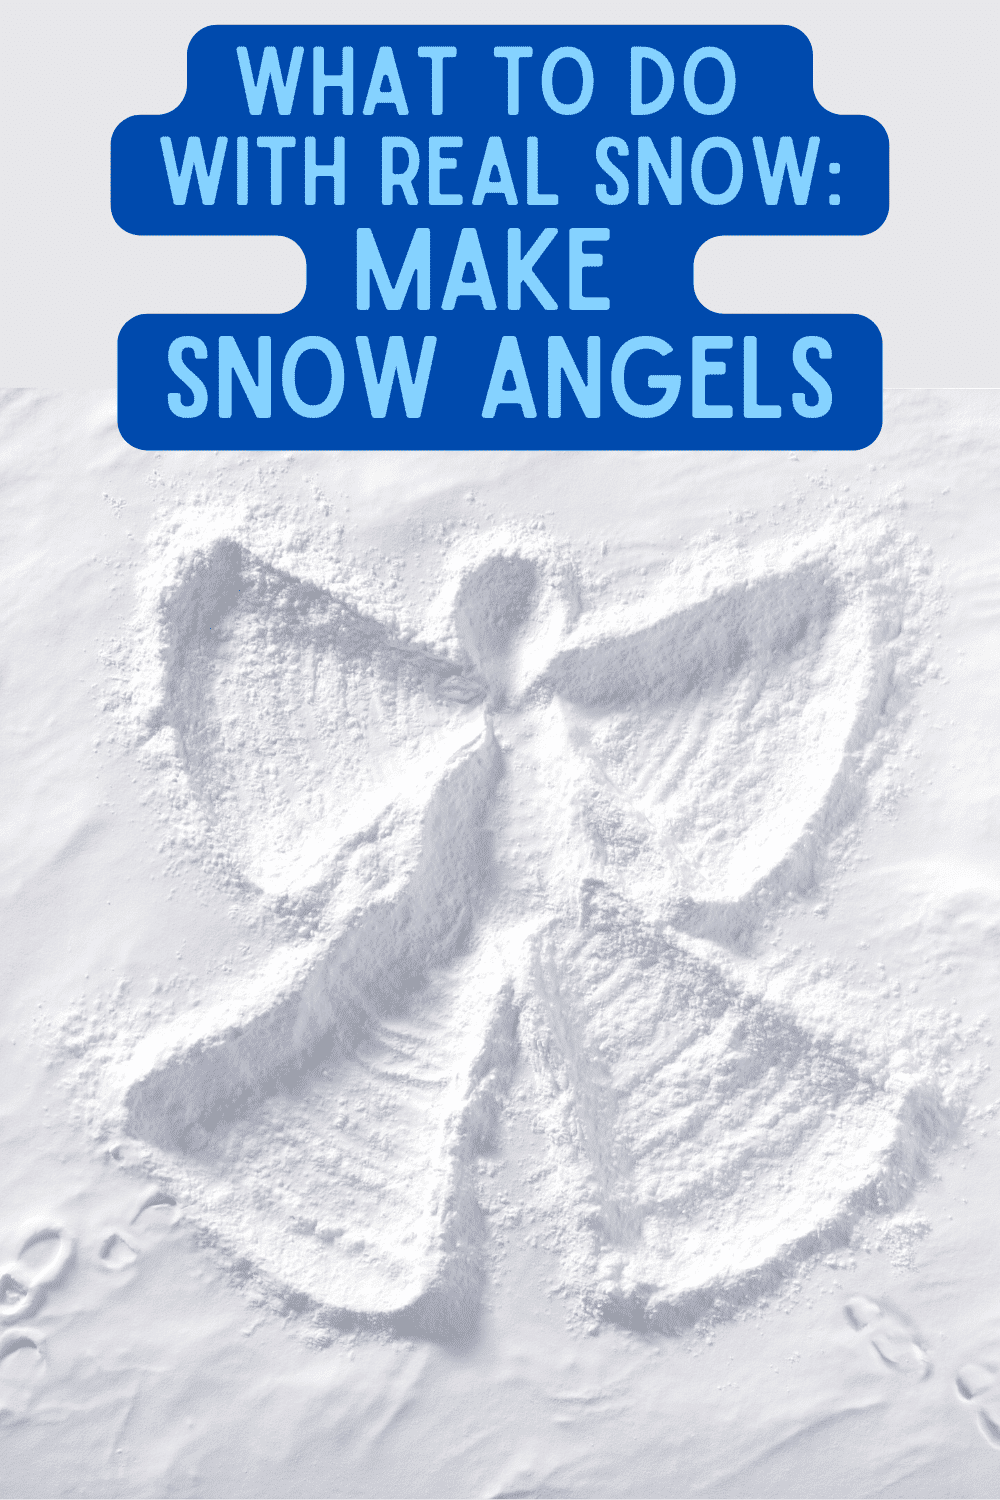 what to make with real snow - make snow angels text over a snow angel impression in the snow